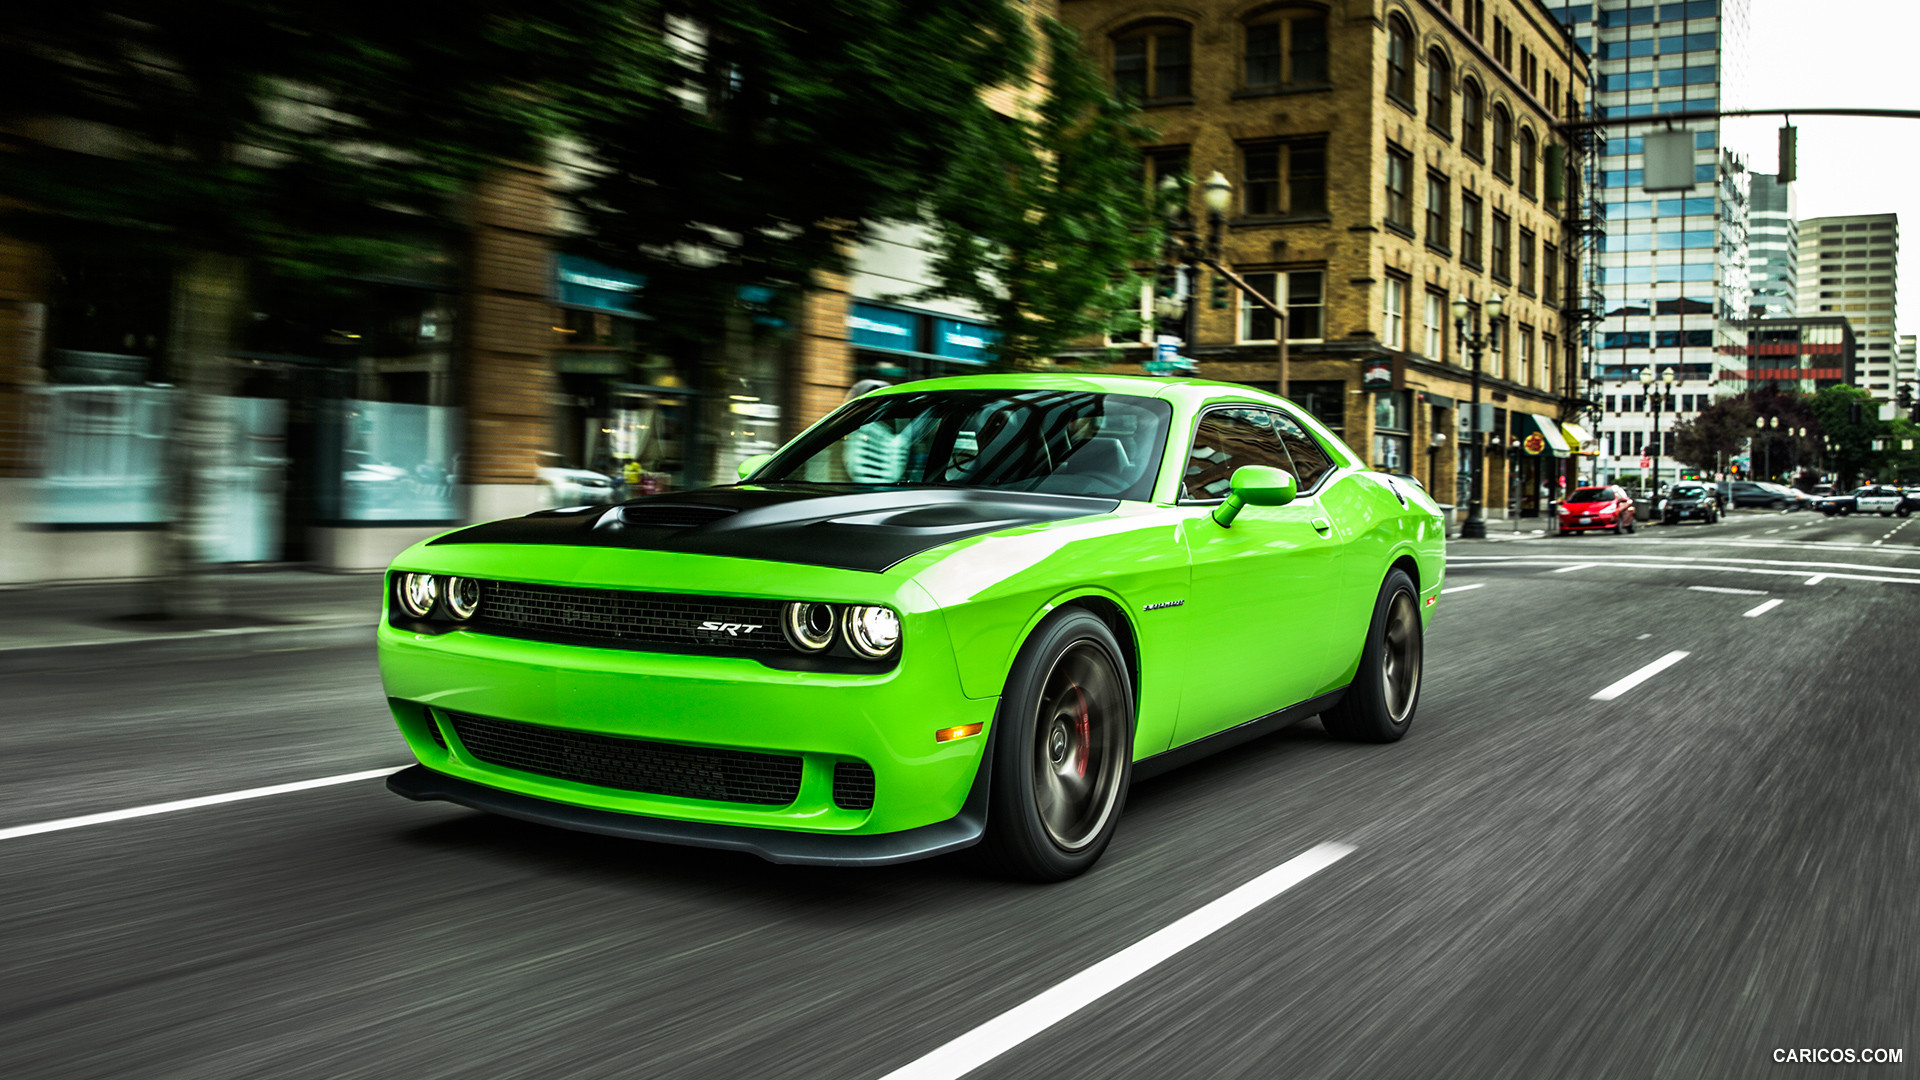 1920x1080 Dodge Charger SRT Hellcat 2015 High Definition Images - http . ...